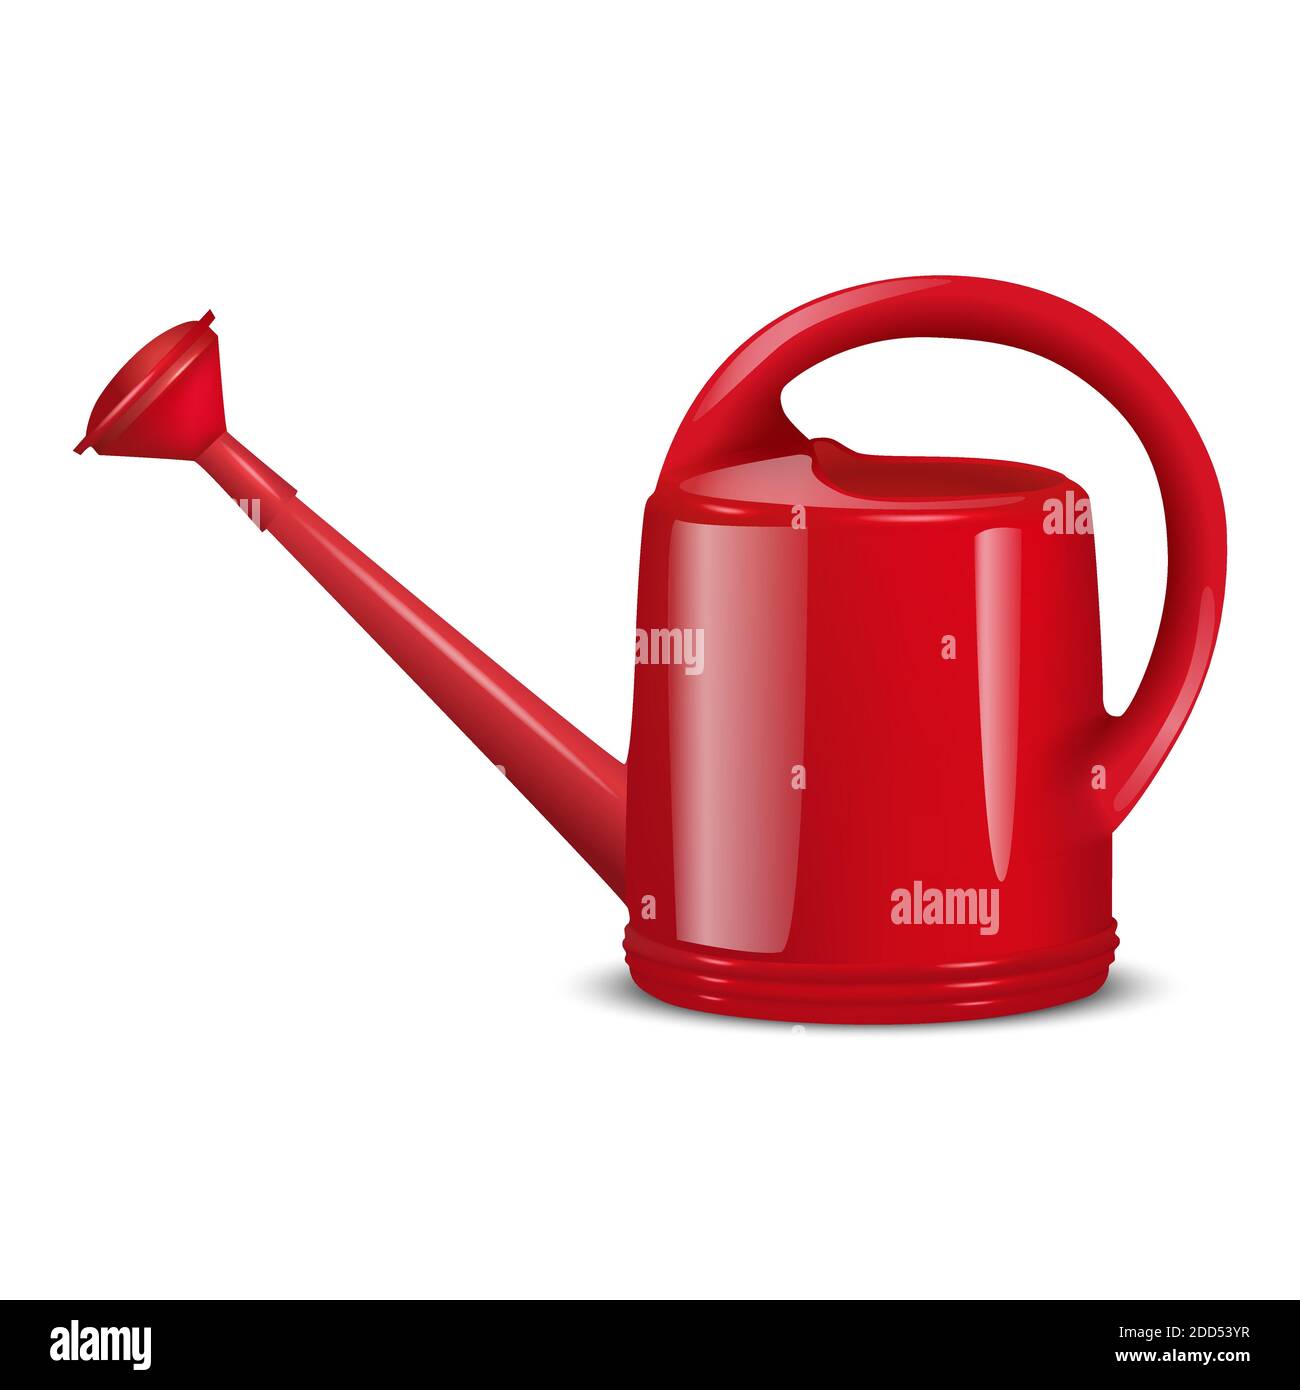 3d realistic vector icon illustration of red watering can for gardening. Isolated on white background. Stock Vector